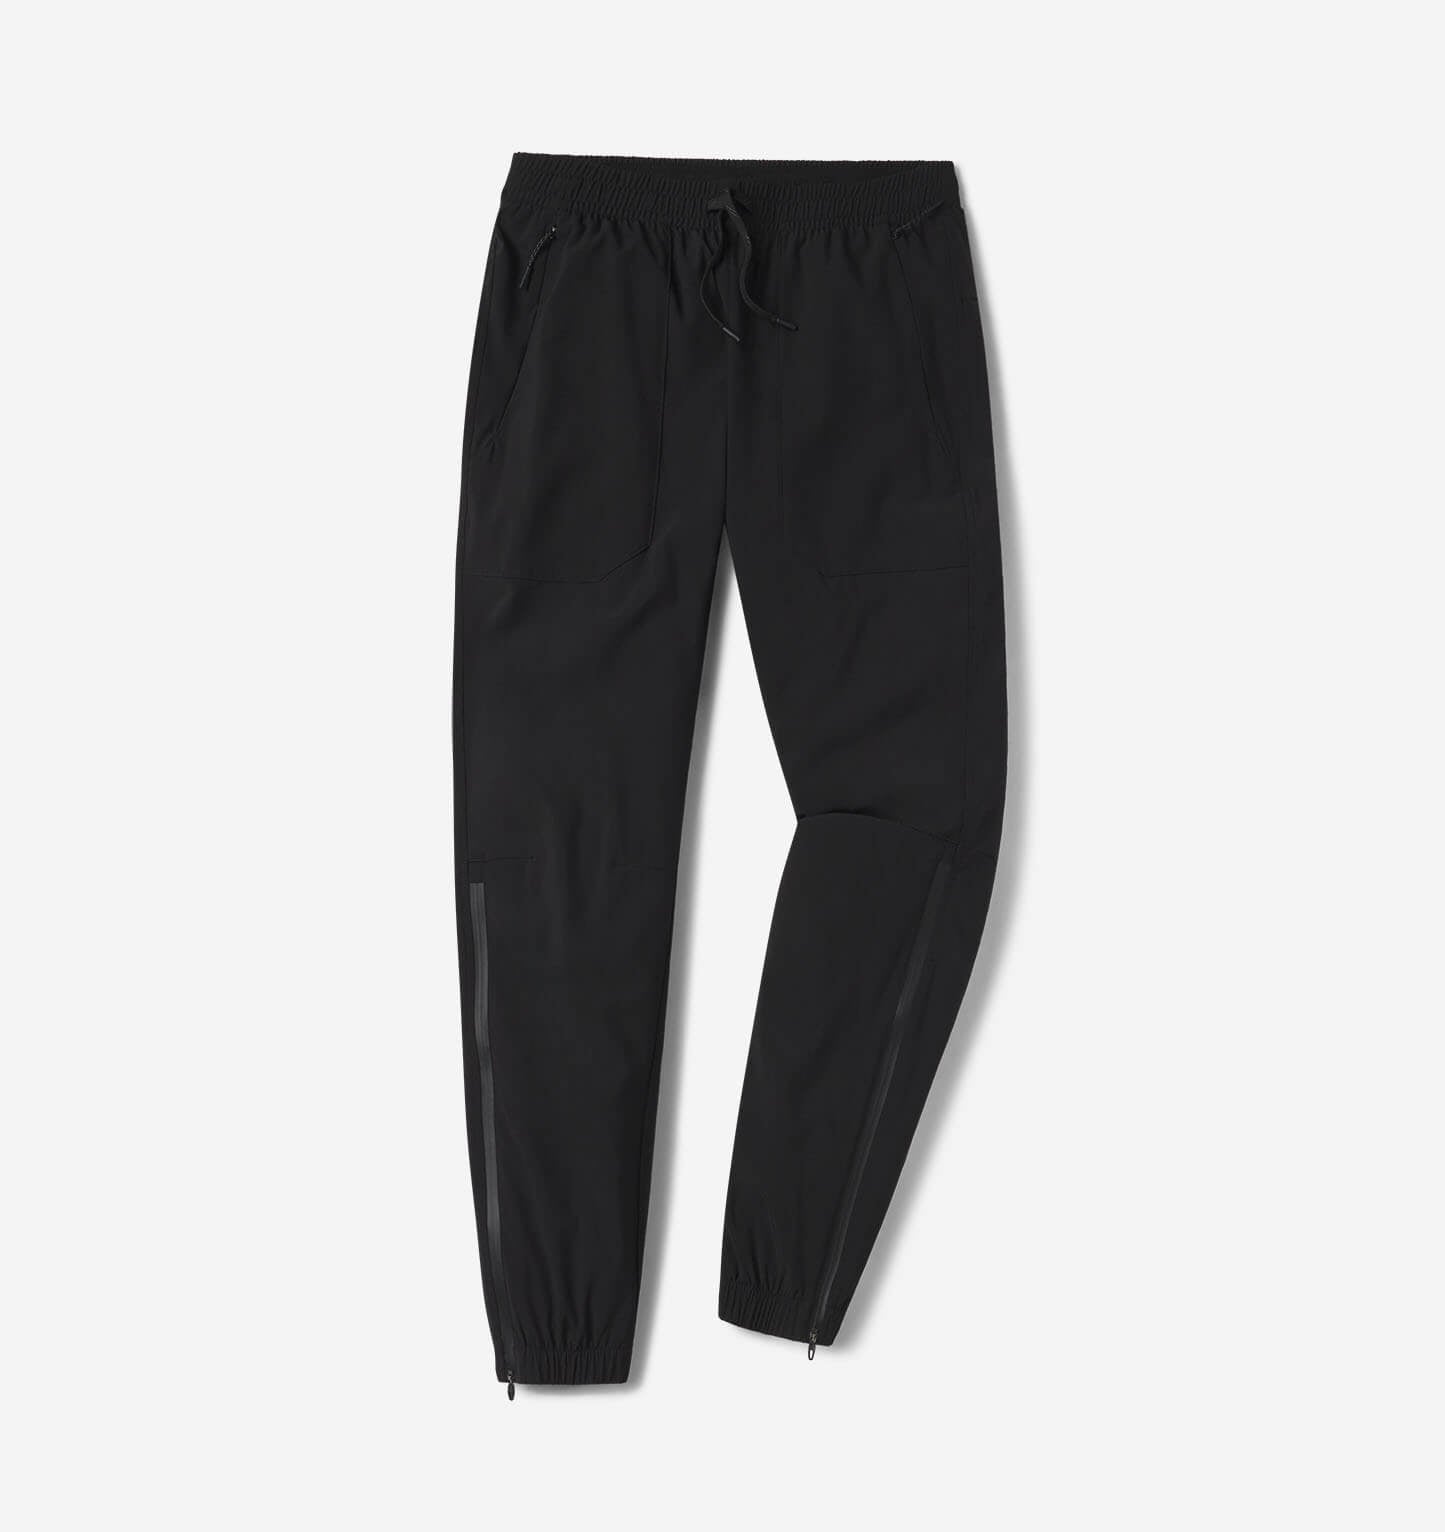 Women's 3/4 Length Pants: 98 Items up to −90%